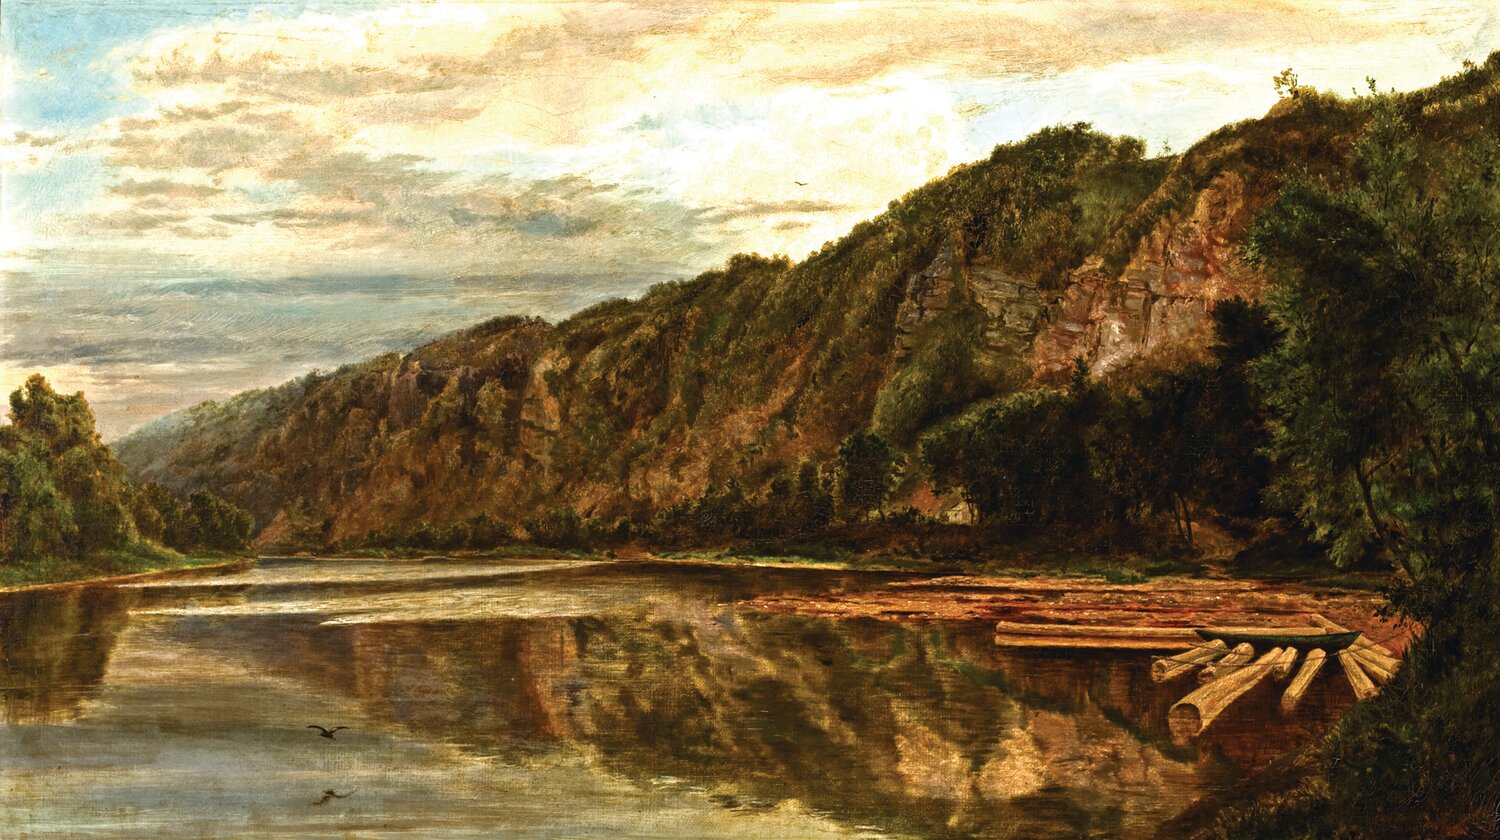 Thomas P. Otter (1832-1890), The Palisades at Nockamixon (also known as Nockamixon Narrows of the Delaware), 1875, oil on canvas, 16 ¼ x 28 ¼ inches. James A. Michener Art Museum. Gift of the Pennsylvania Academy of the Fine Arts through the bequest of Kenneth W. Gemmill.